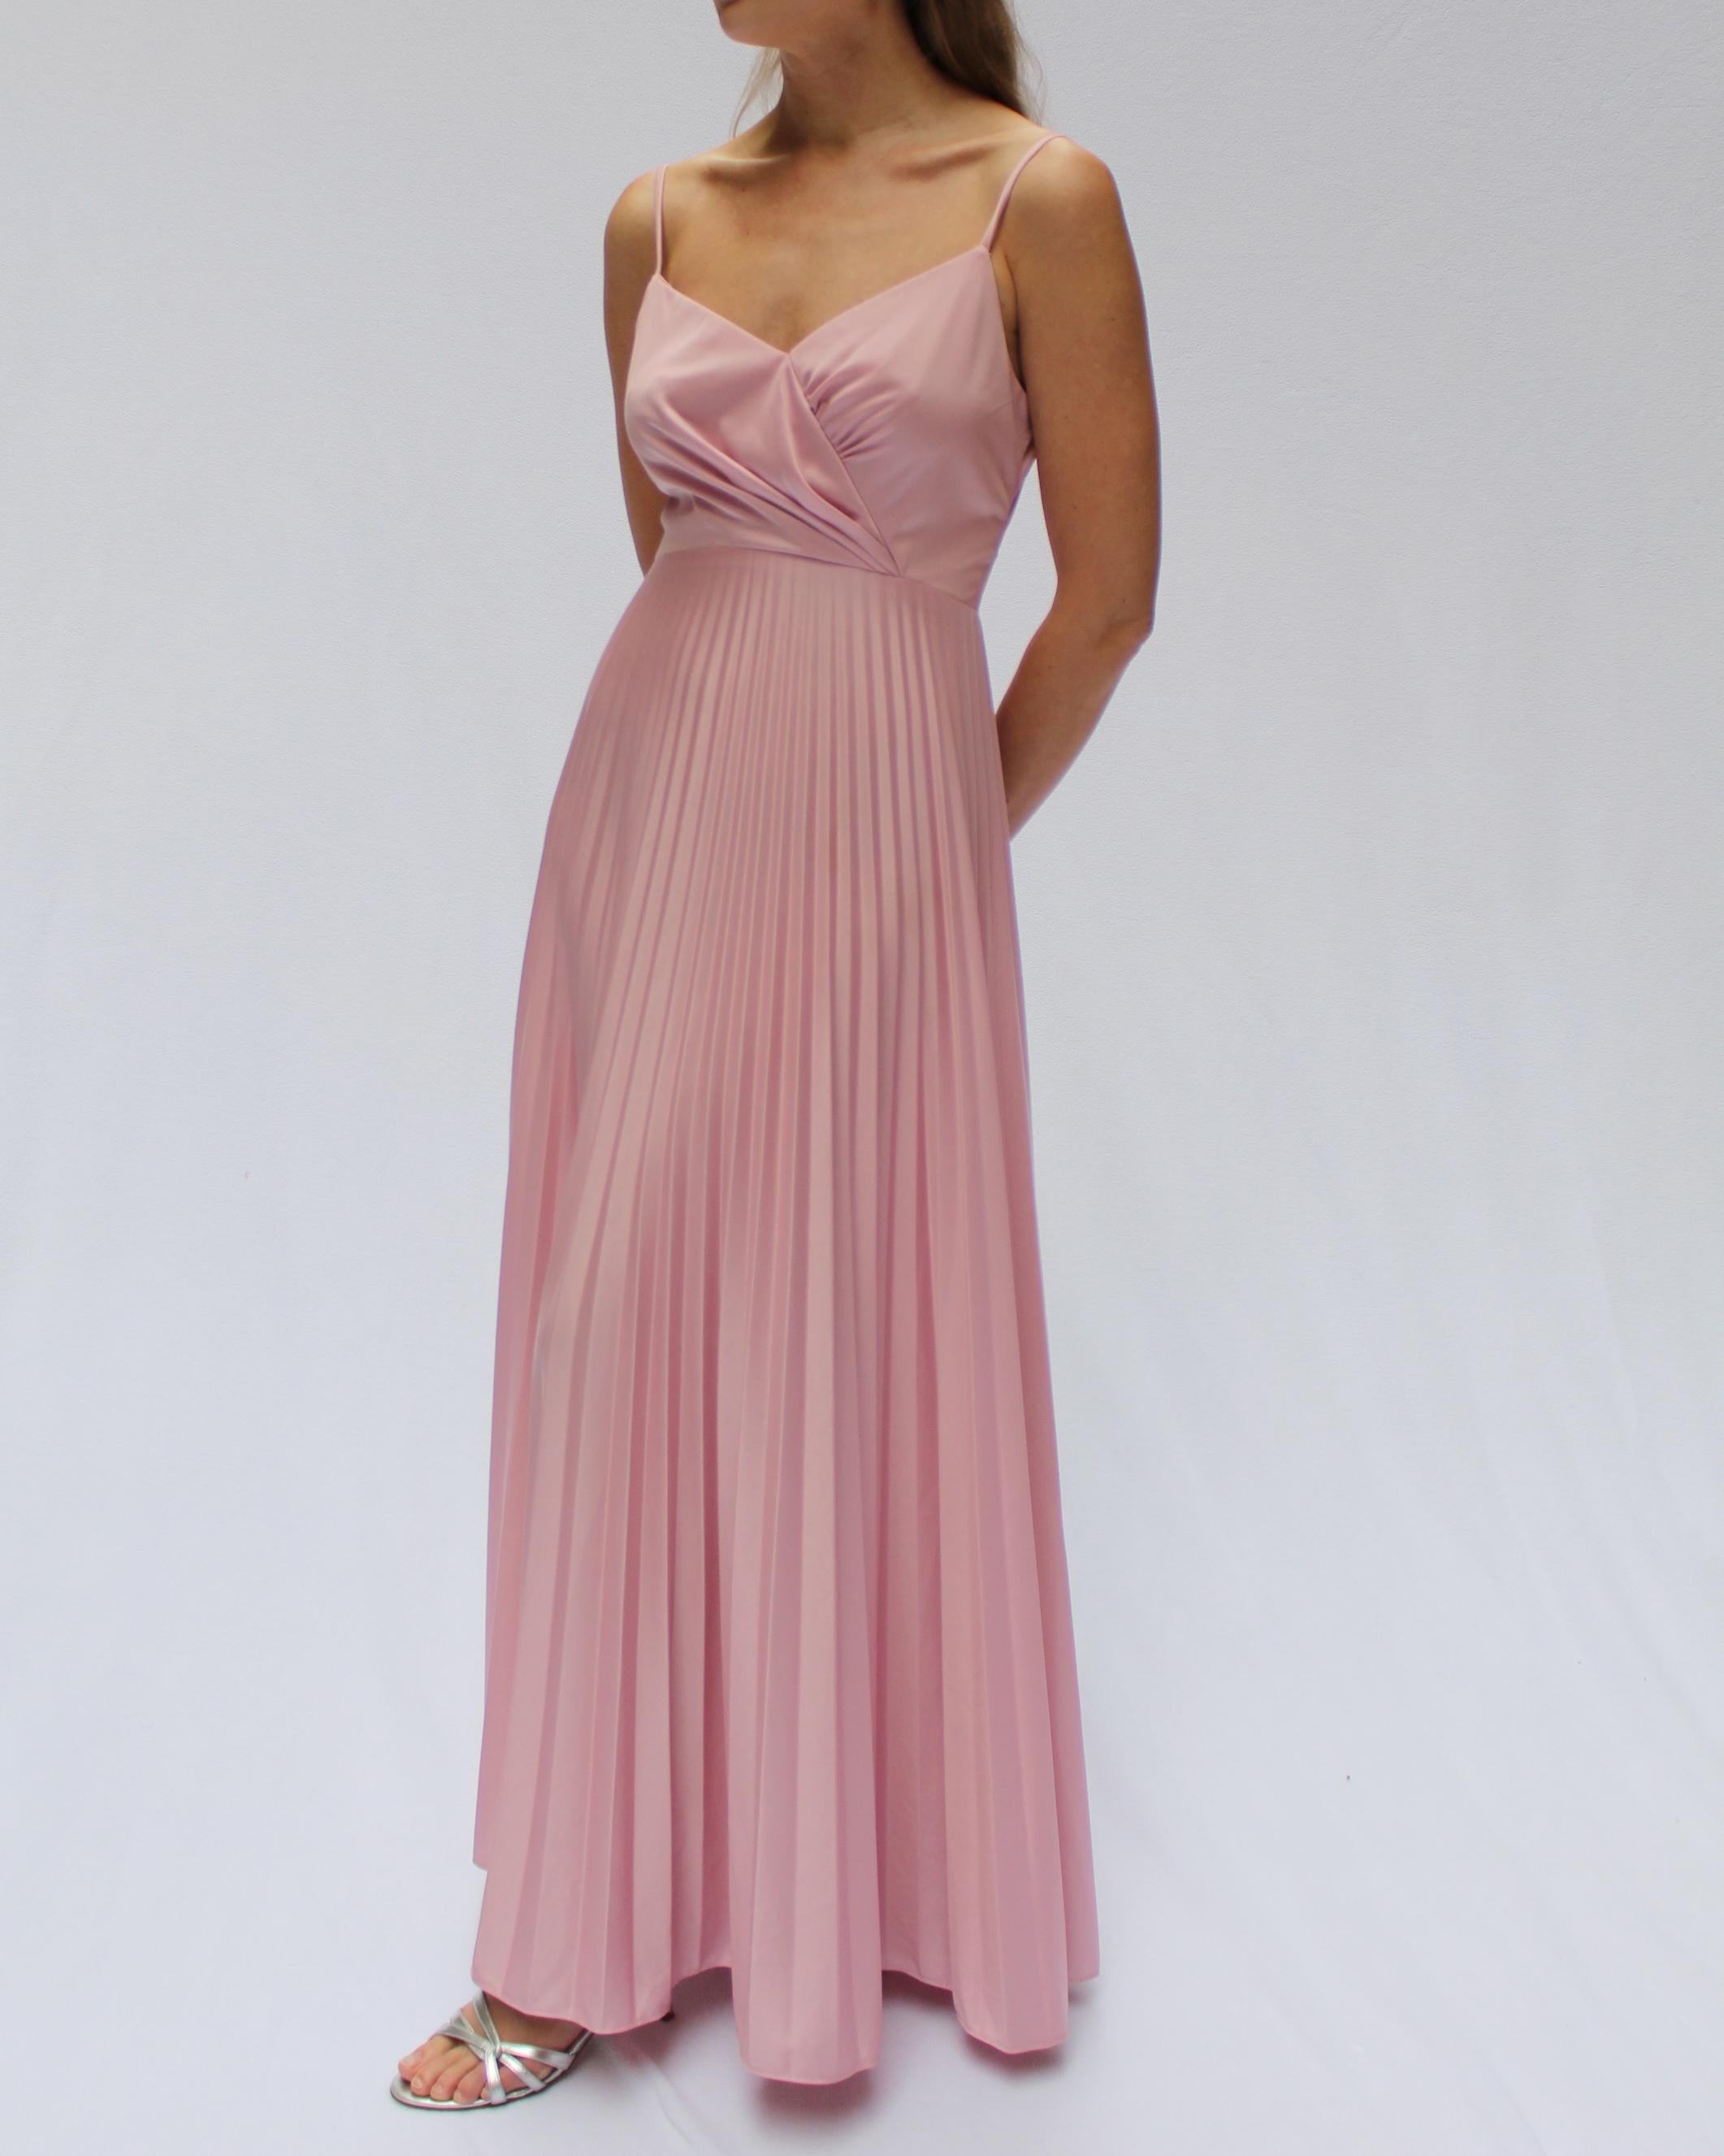 This fantastic 1970s jersey gown would not look out of place on Diana Ross or Jerry Hall at Studio 54 in the late 1970s. It features a gathered bodice with an empire waist, and an accordion-pleated skirt. I love how comfortable 1970s jersey dresses